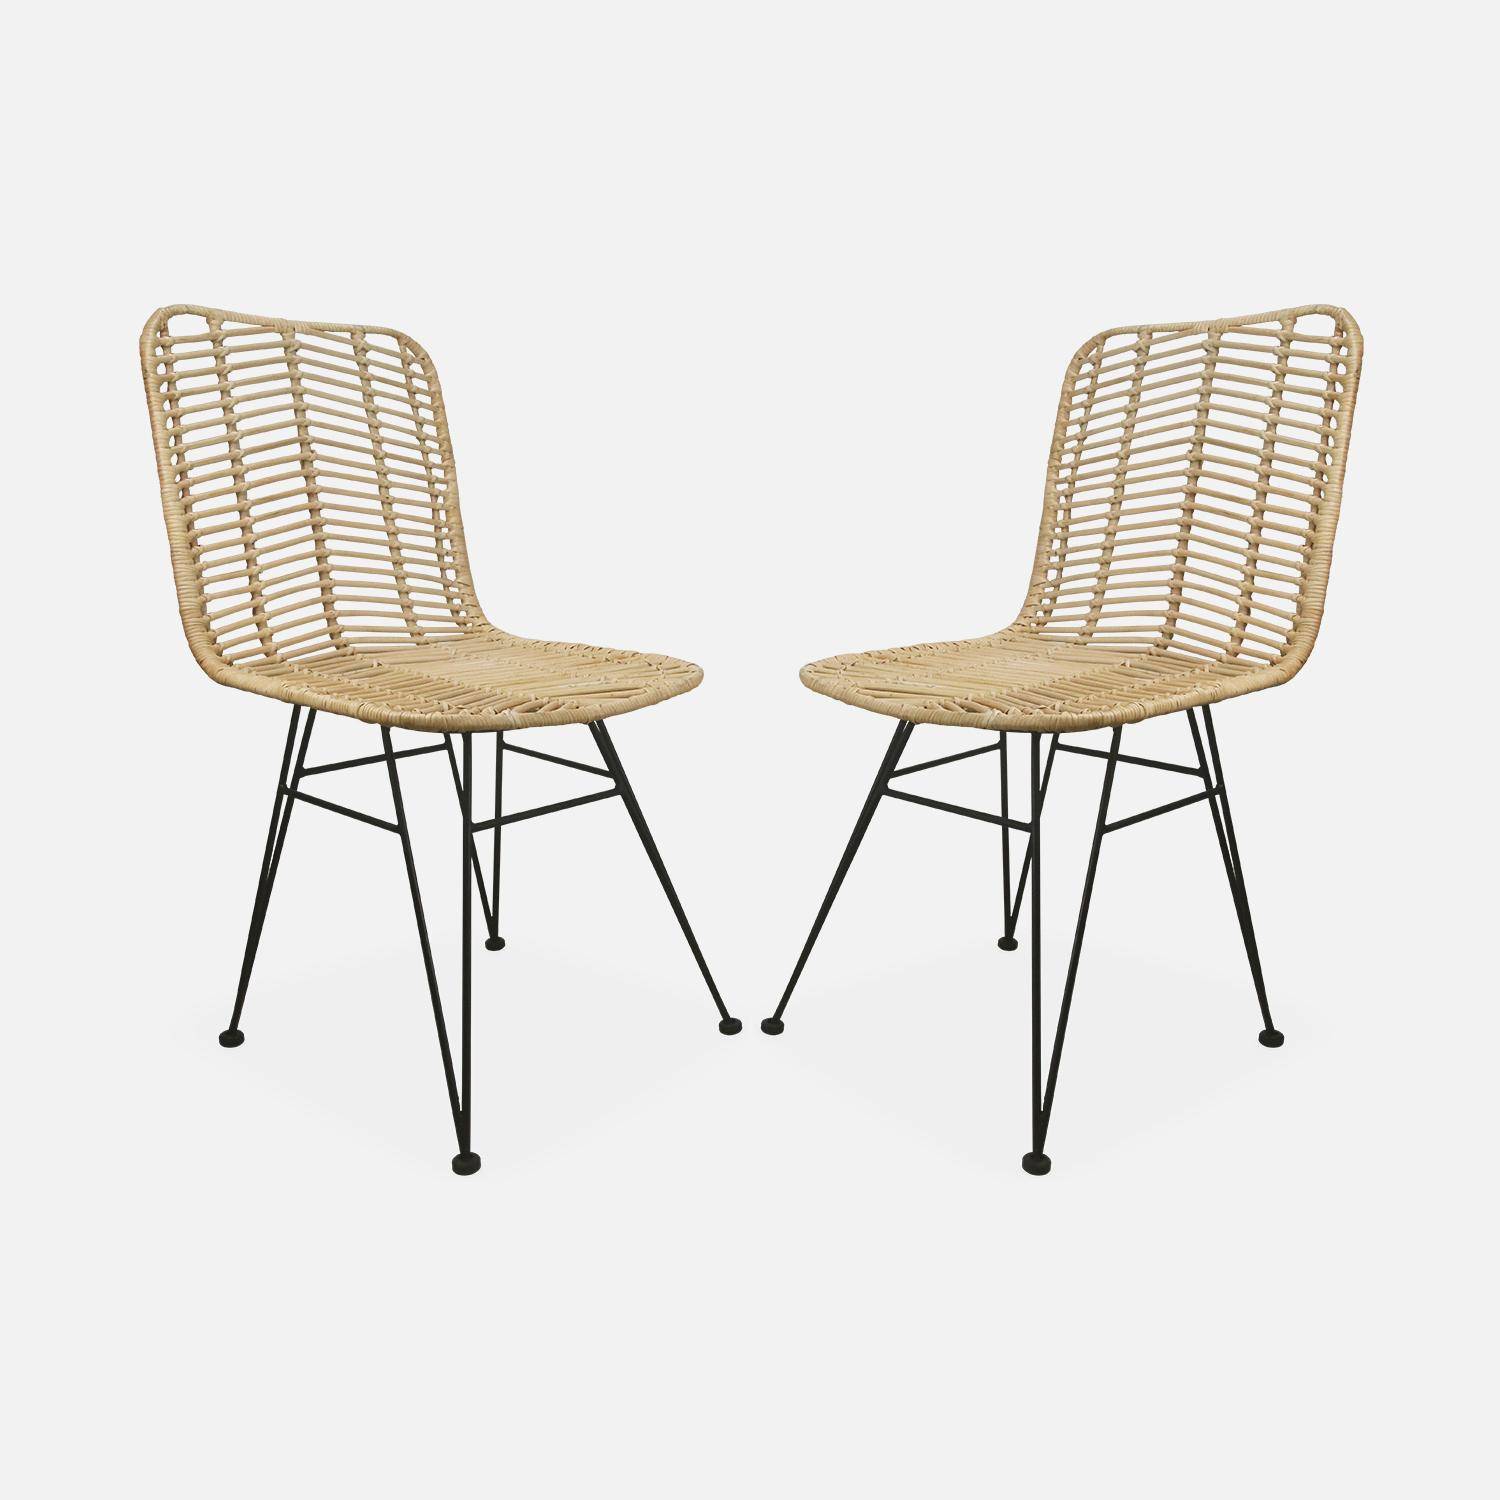 Pair of high-backed rattan dining chairs with metal legs and cushions - Cahya - Natural rattan, Black cushions Photo8